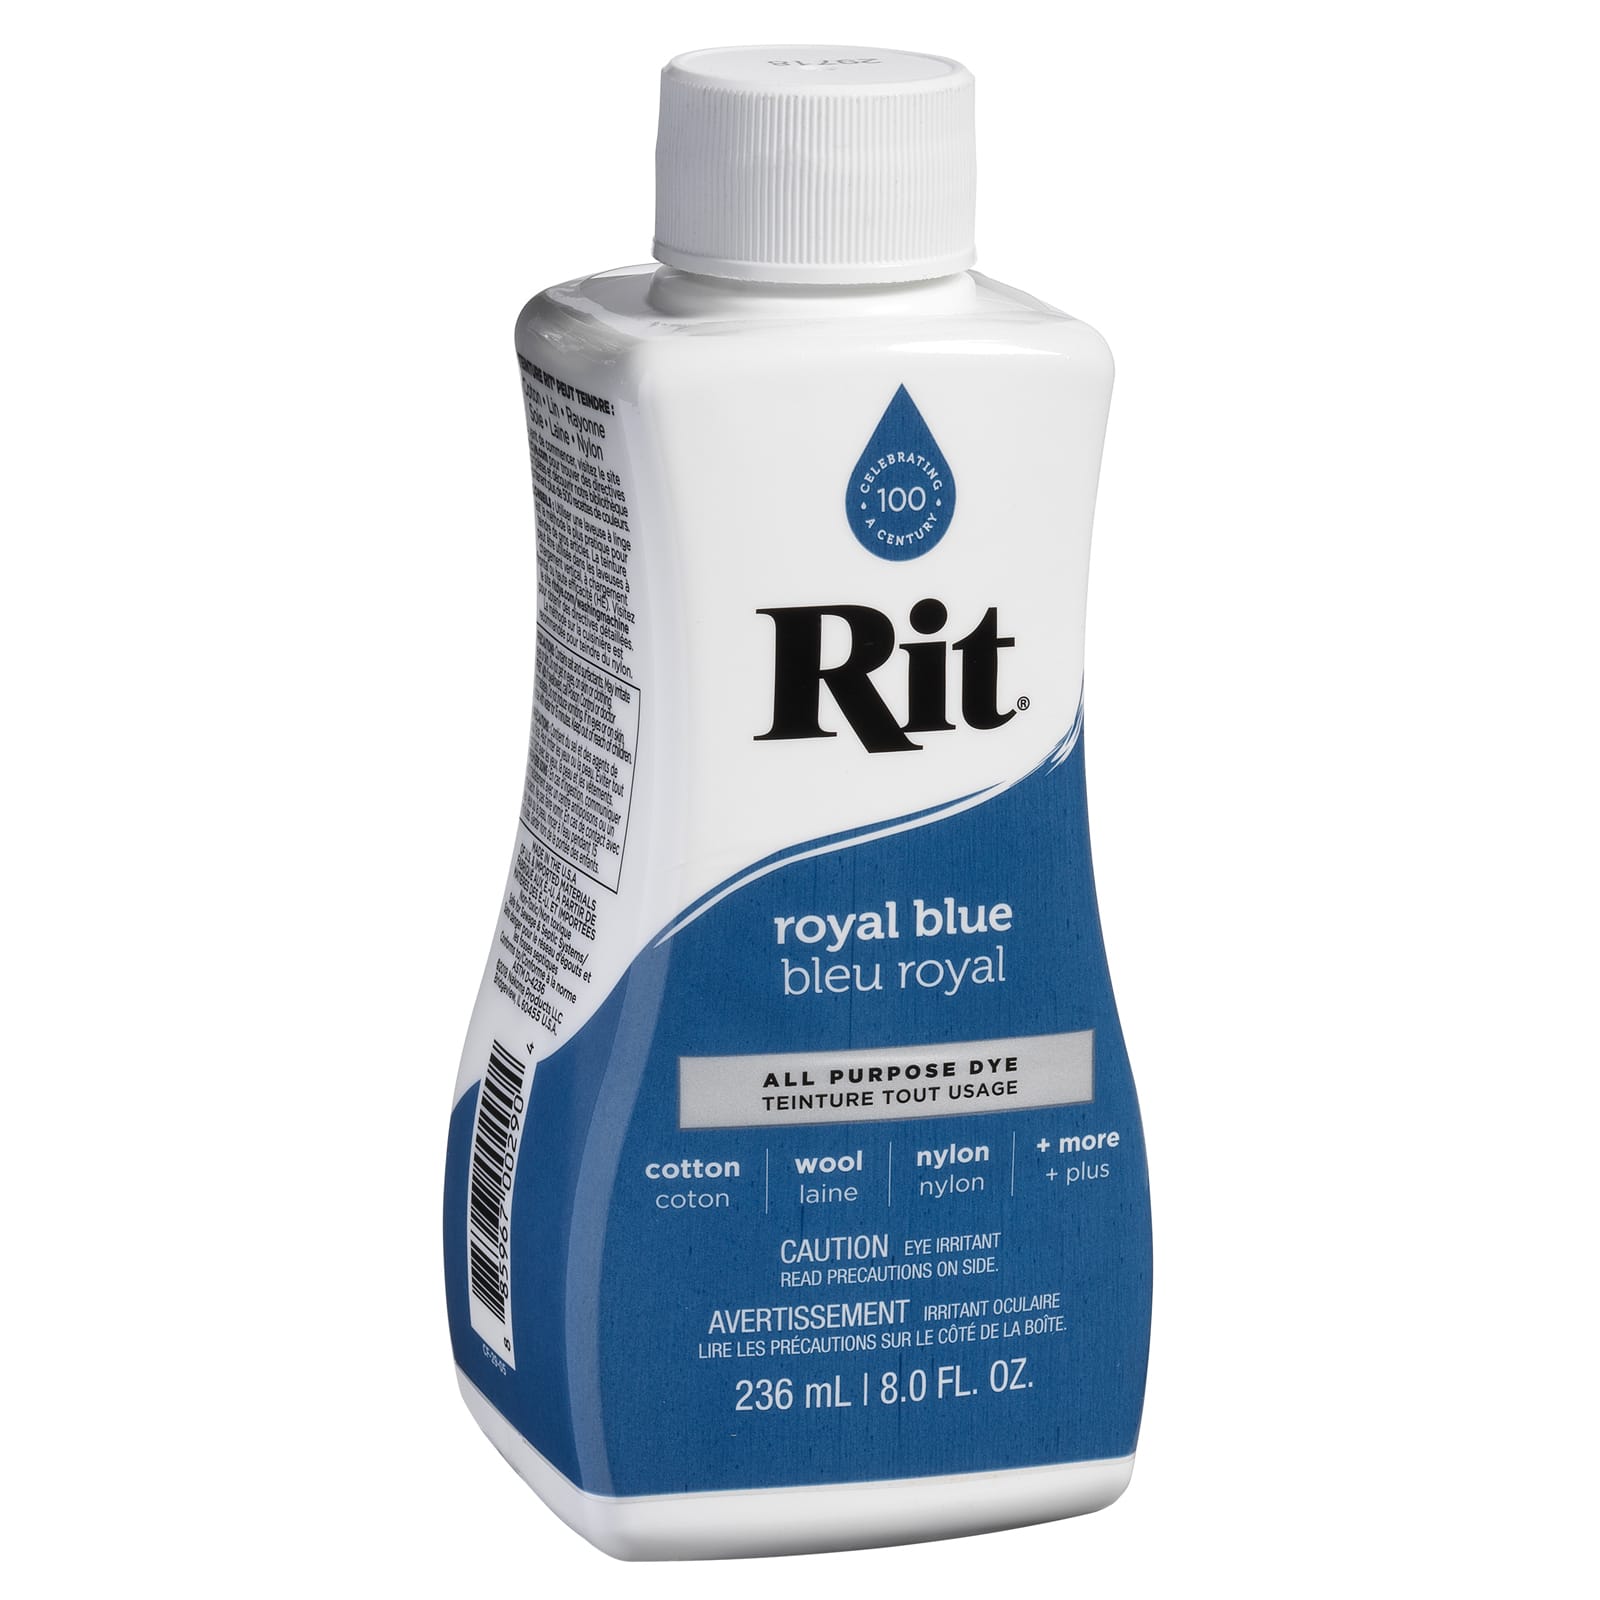 Rit Dye Multi-Purpose Liquid 8 OZ. | Great for Clothing, Accessories,  Décor, and Much More | 2-Pack, Tan